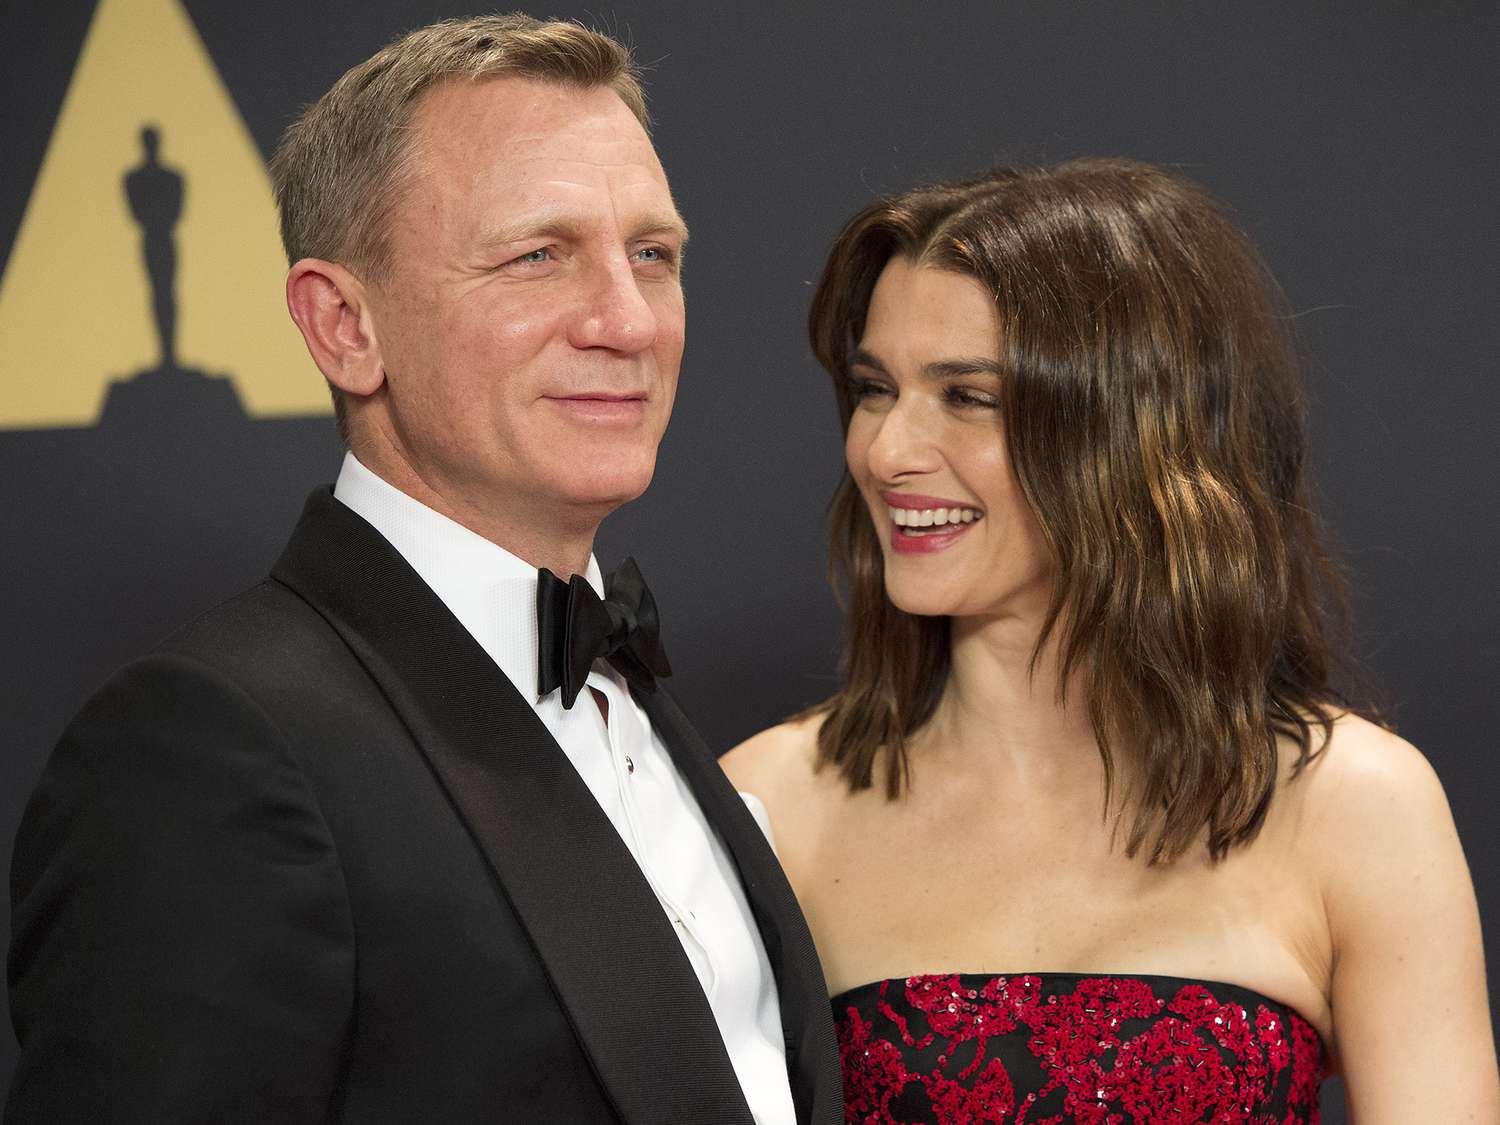 Rachel Weisz with her husband Daniel Craig who she has been married to for over a decade now. 